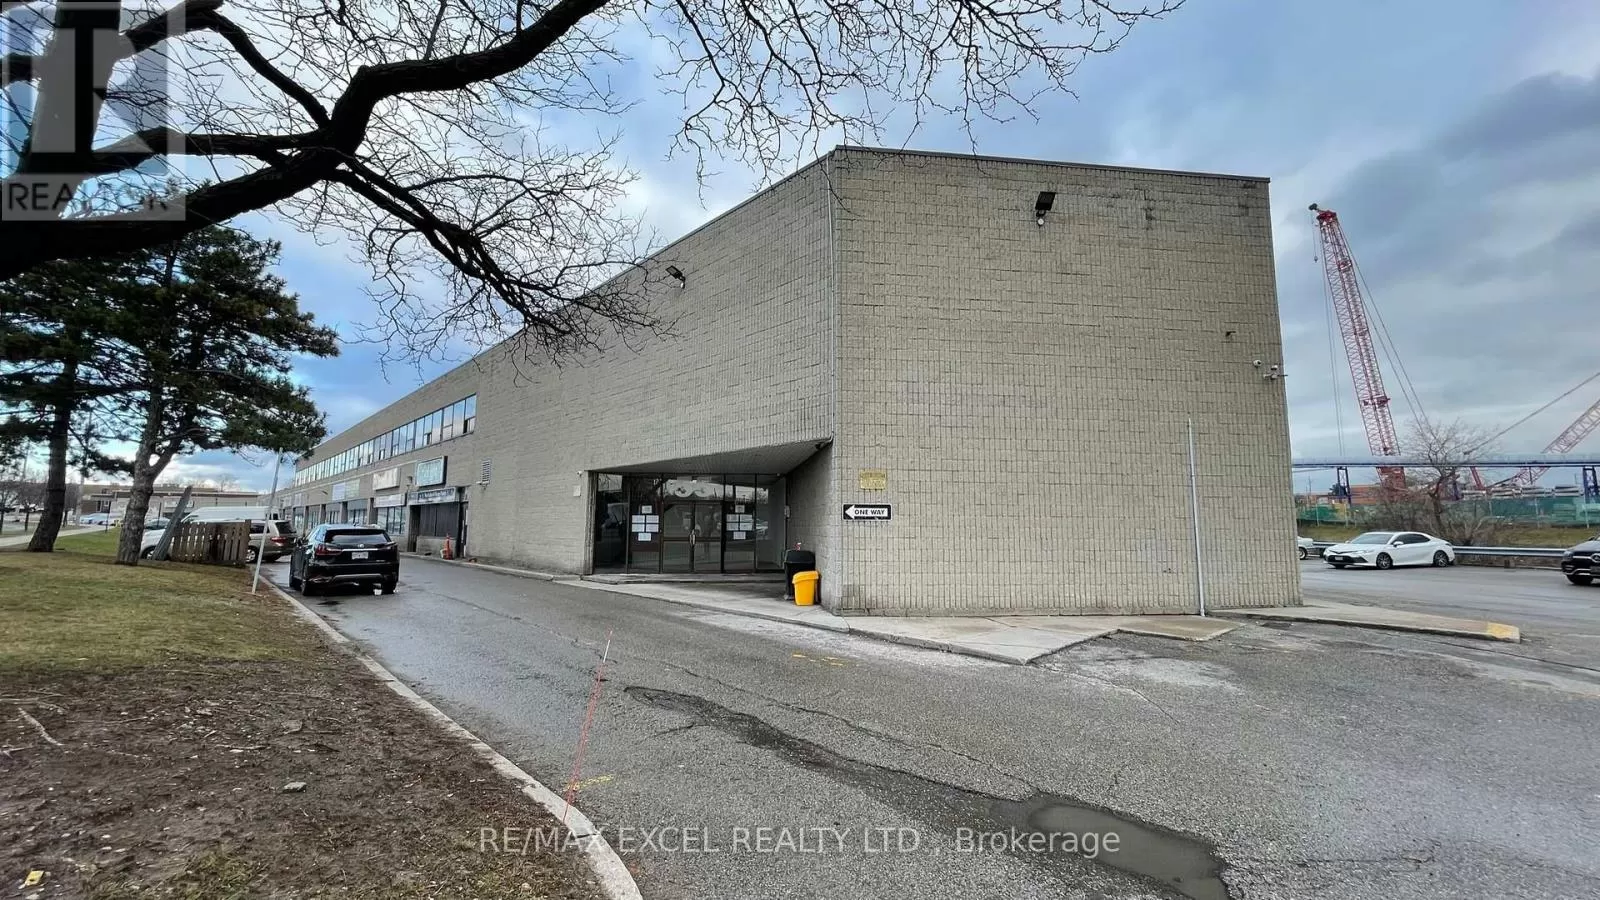 Offices for rent: 230x - 55 Nugget Avenue, Toronto, Ontario M1S 3L1